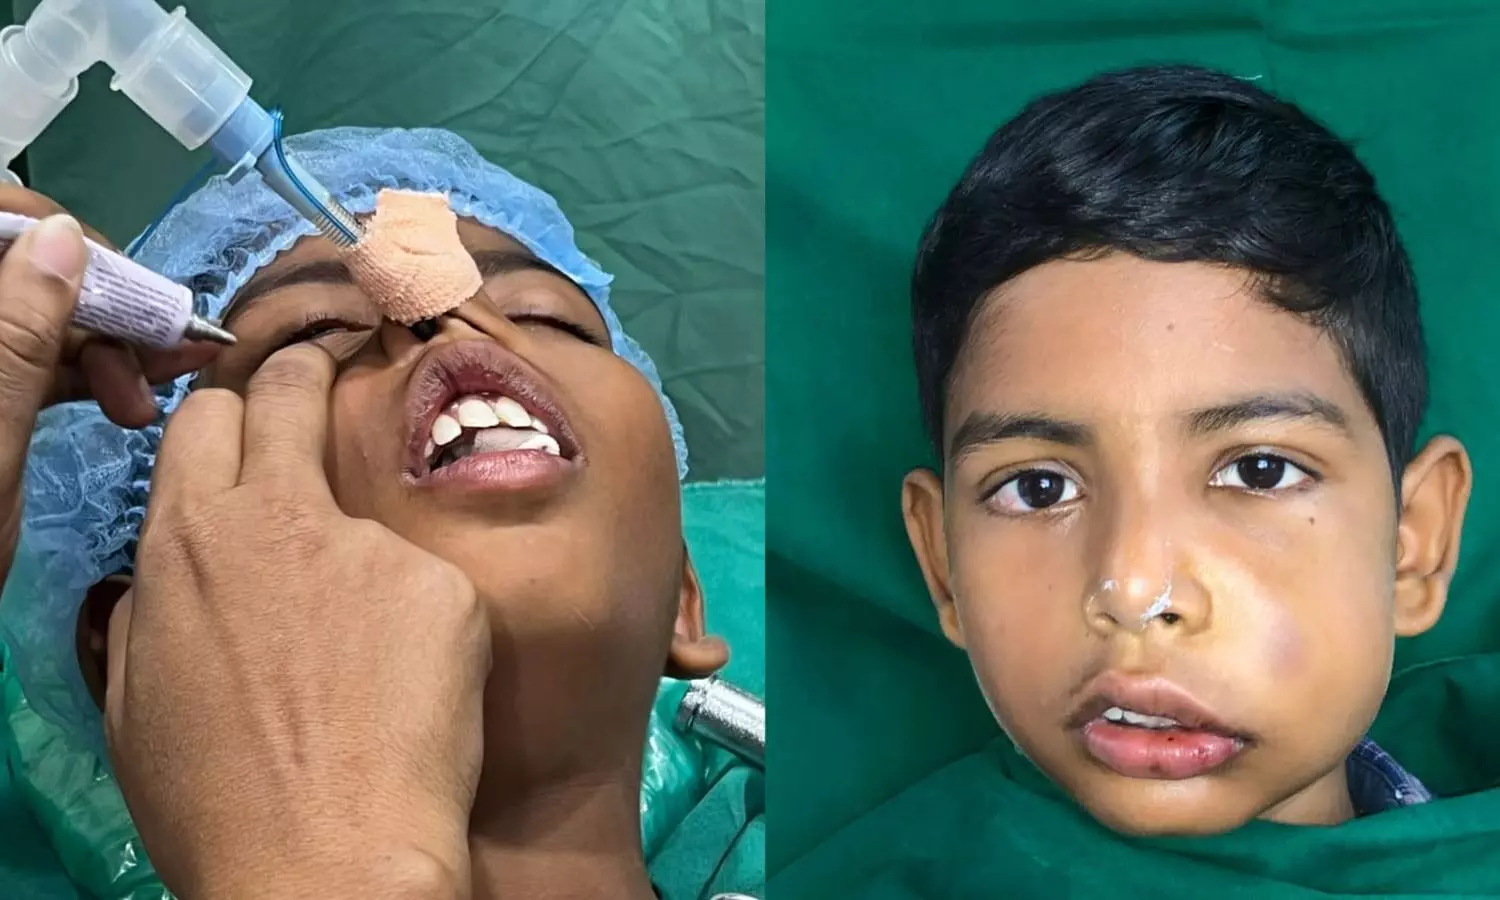 Turned away by hospitals, 11-year-old saved his eyes with support of GITAM doctors